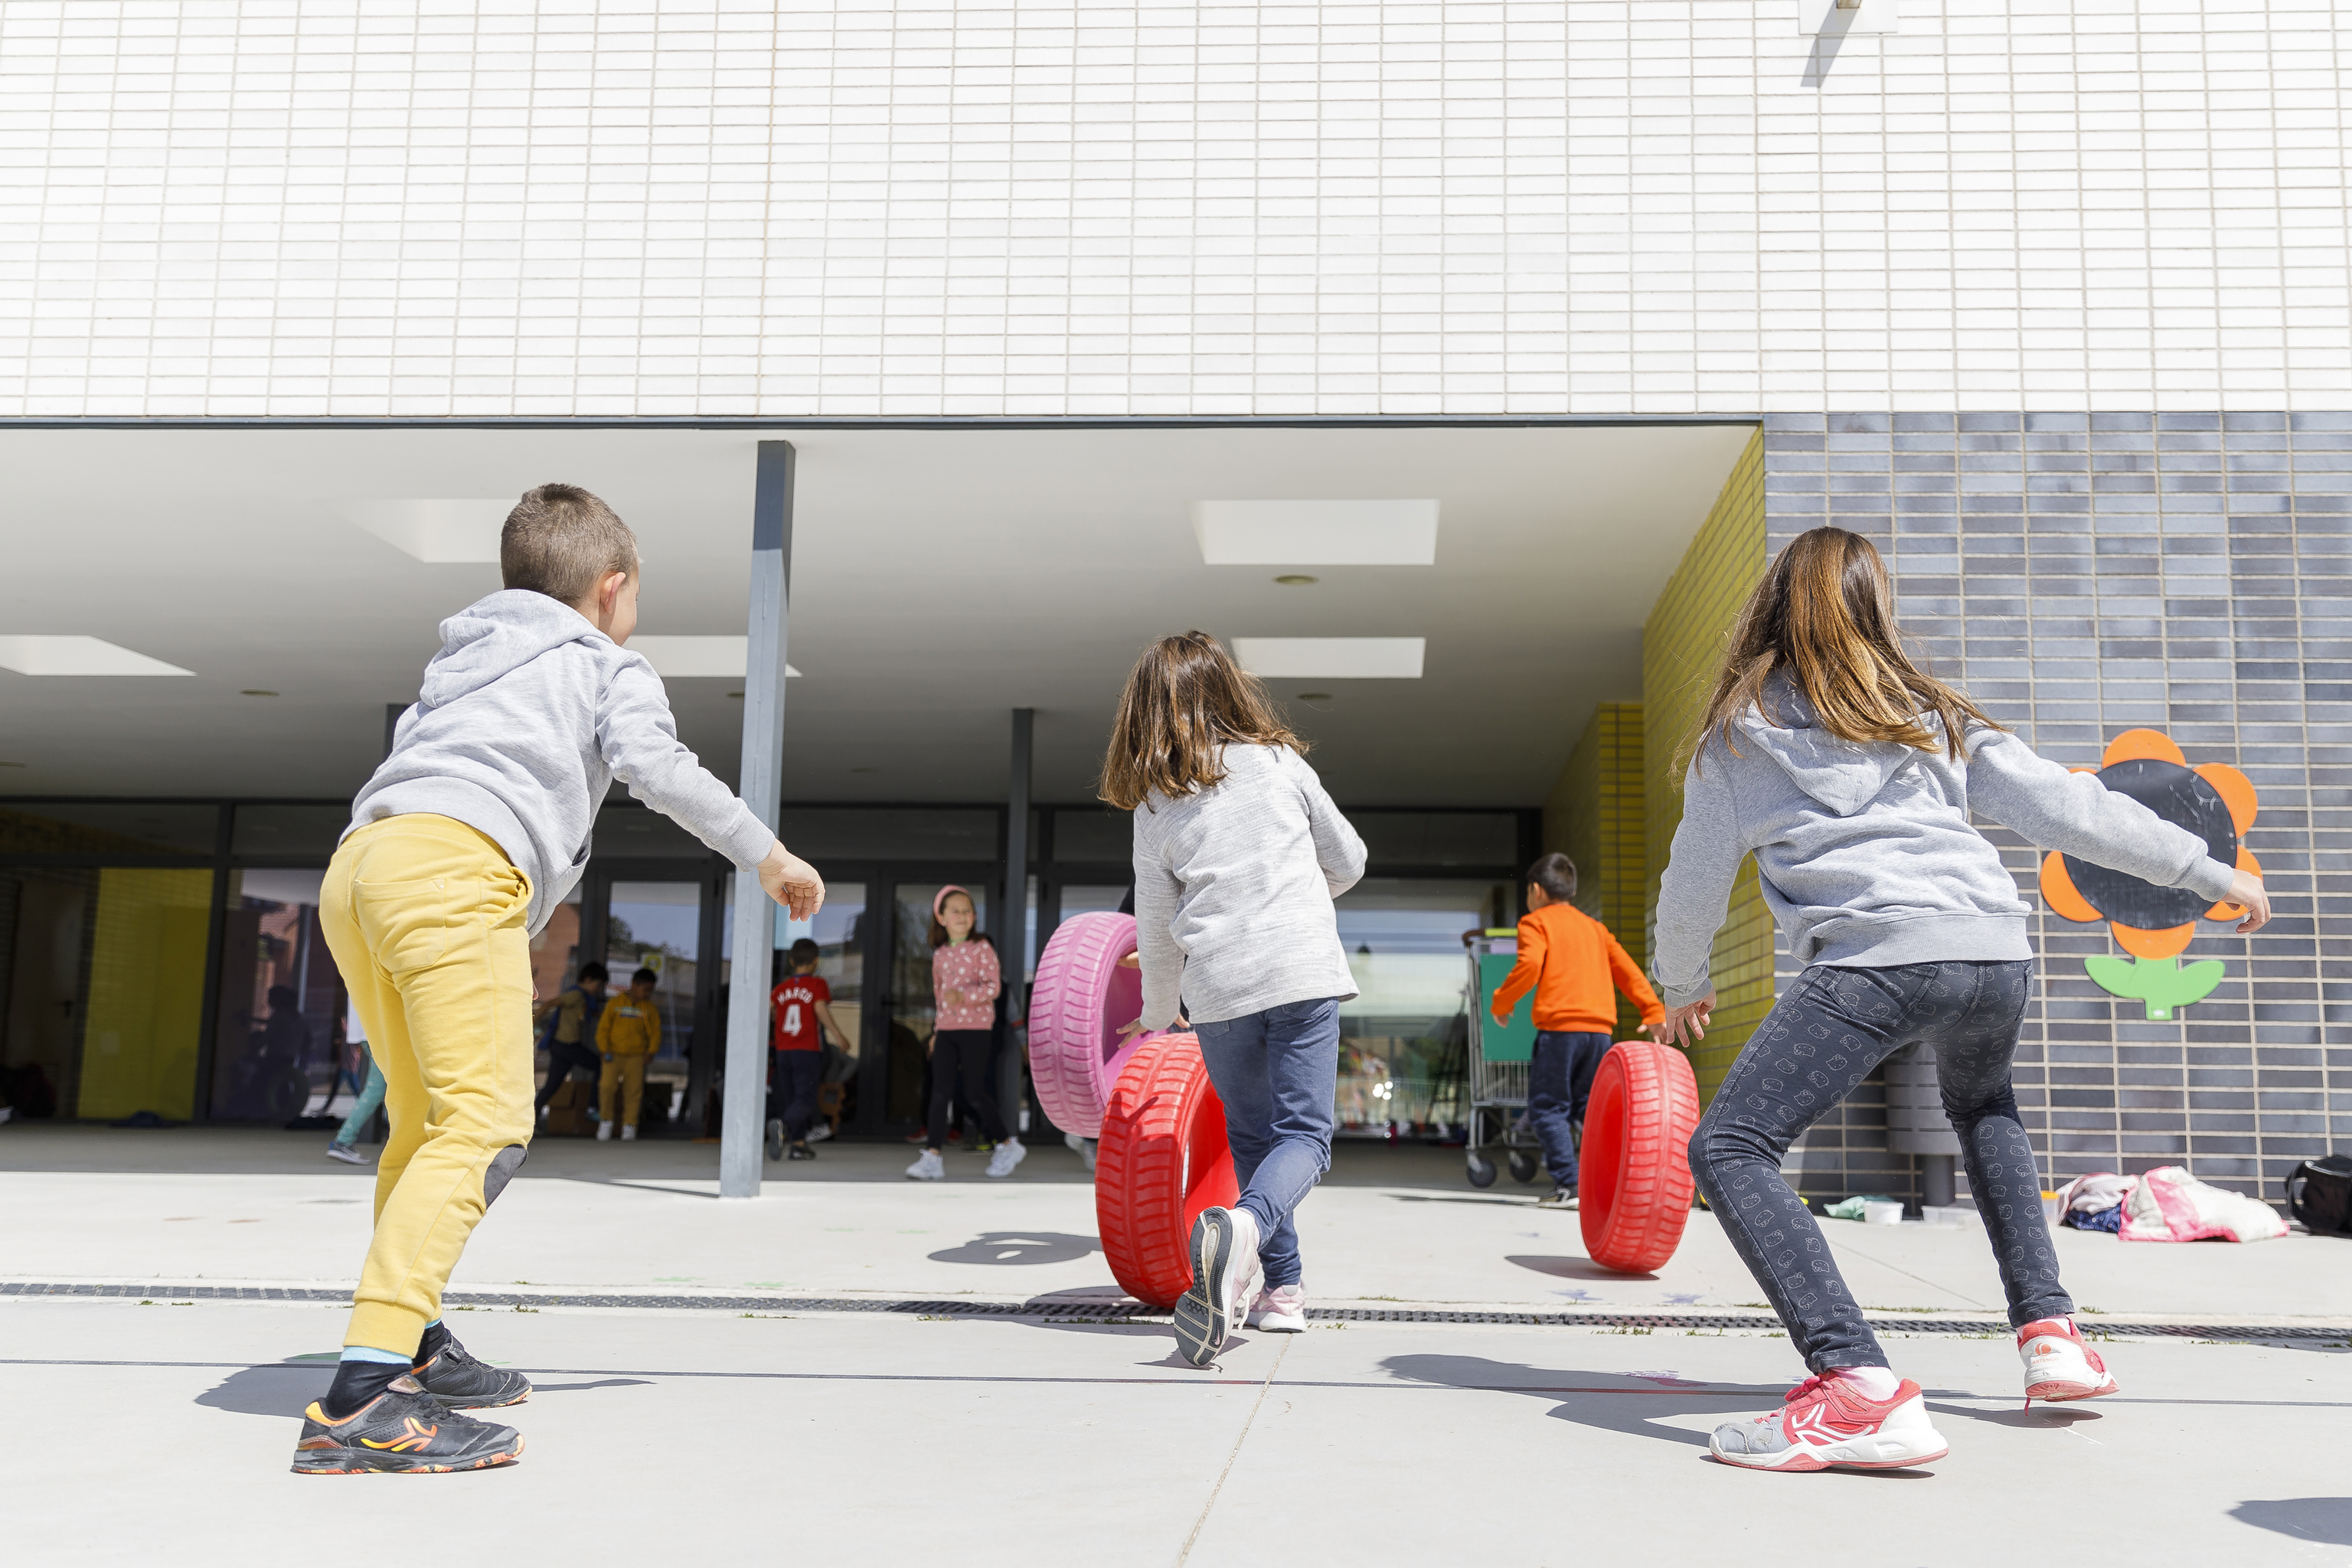 Students of a school in Valverde del Mazano (Segovia) play during their leisure time.